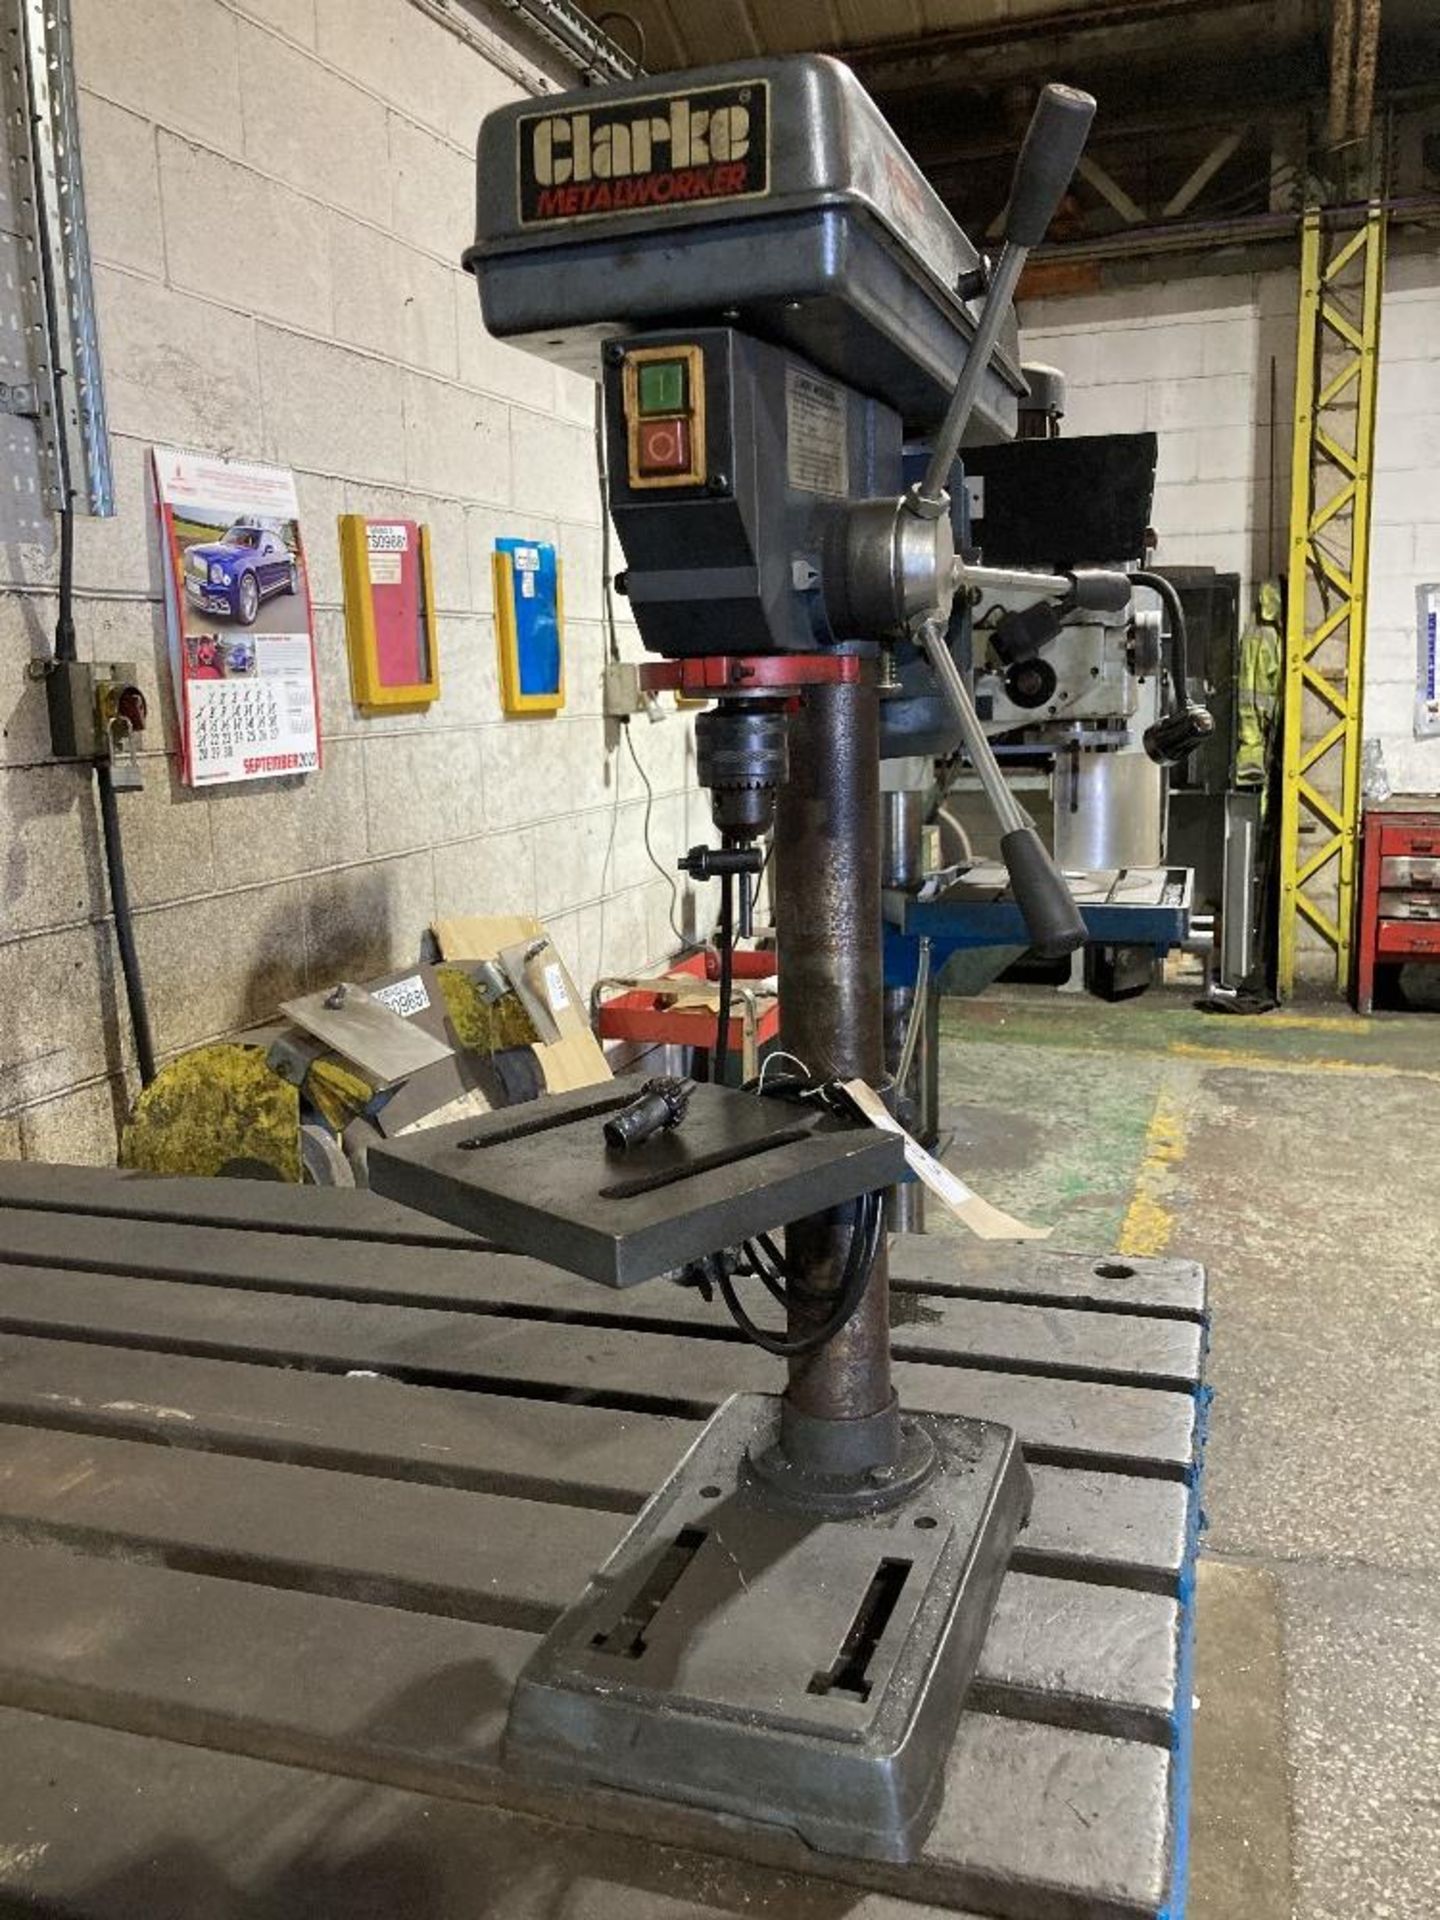 Clarke CDP1518 metal worker 240v bench mounted pillar drill - Image 2 of 3